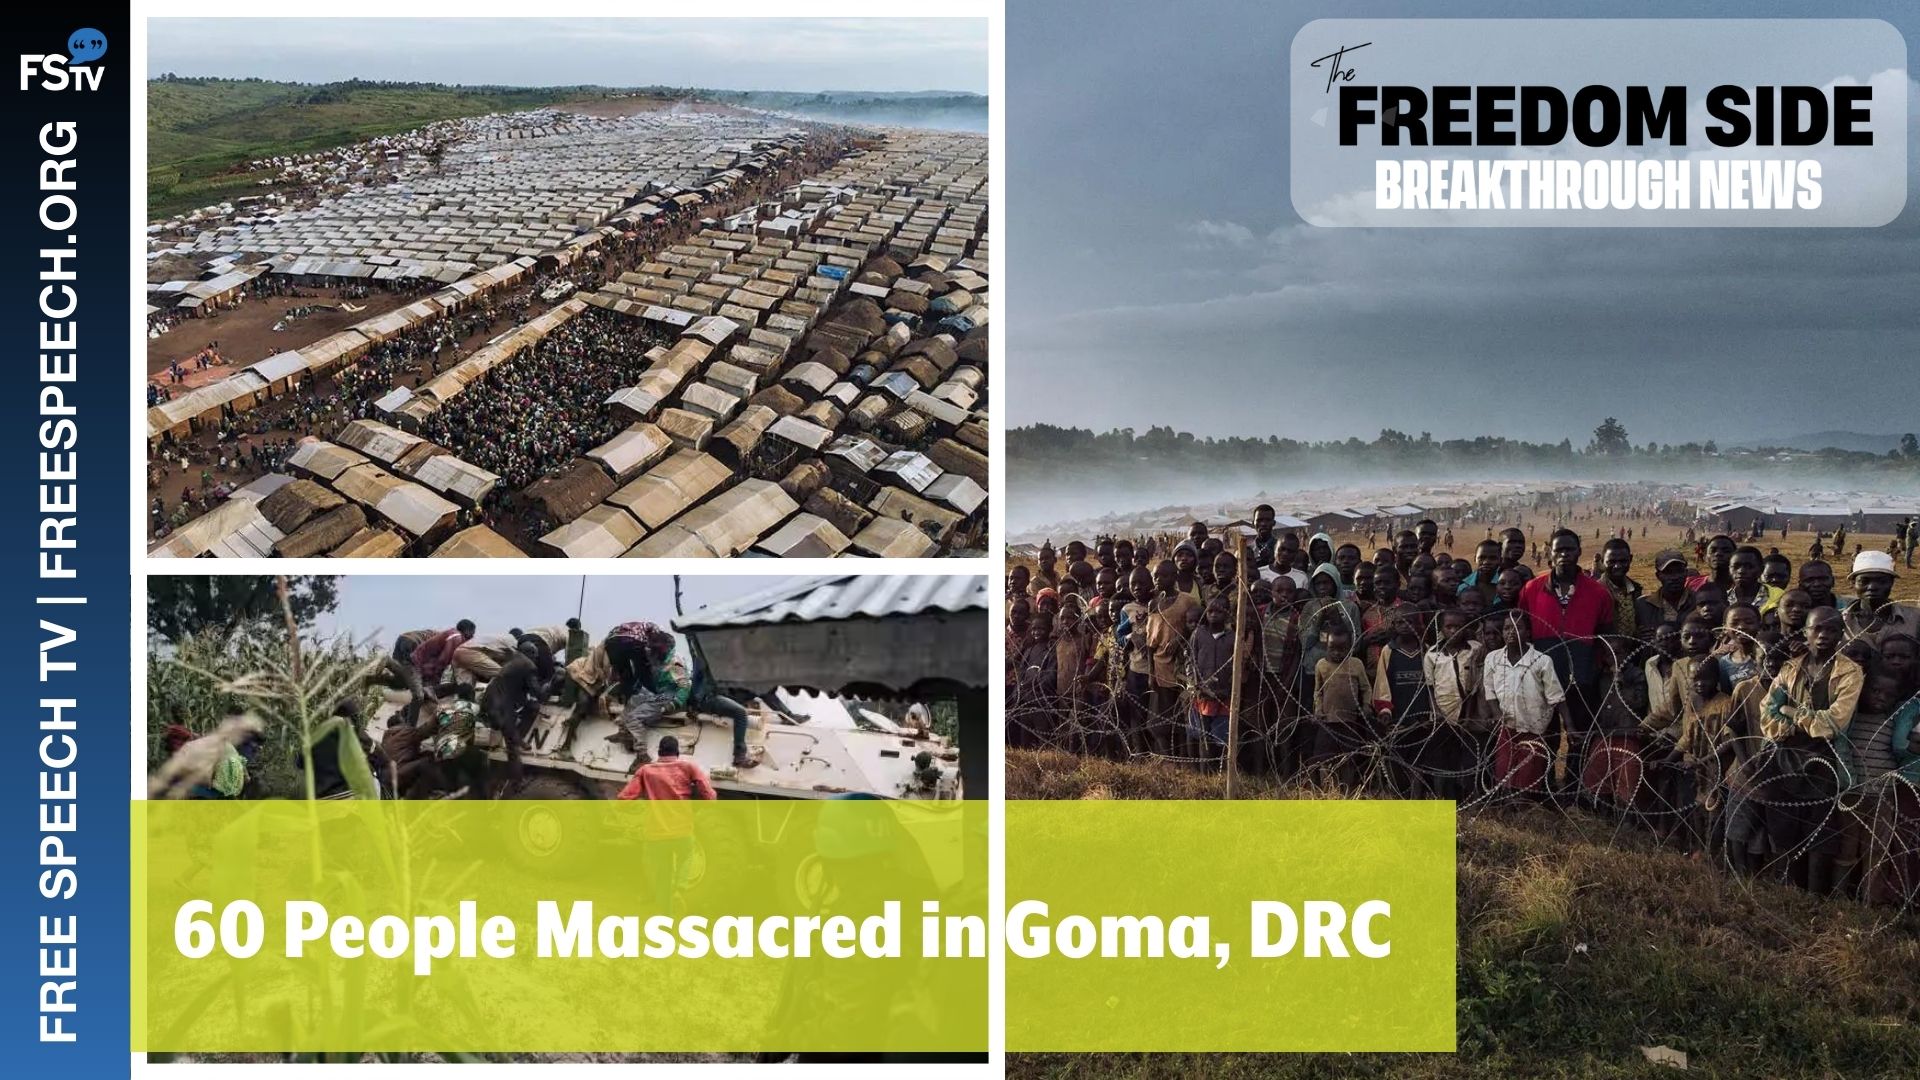 Breakthrough News |  60 People Massacred in Goma, DRC